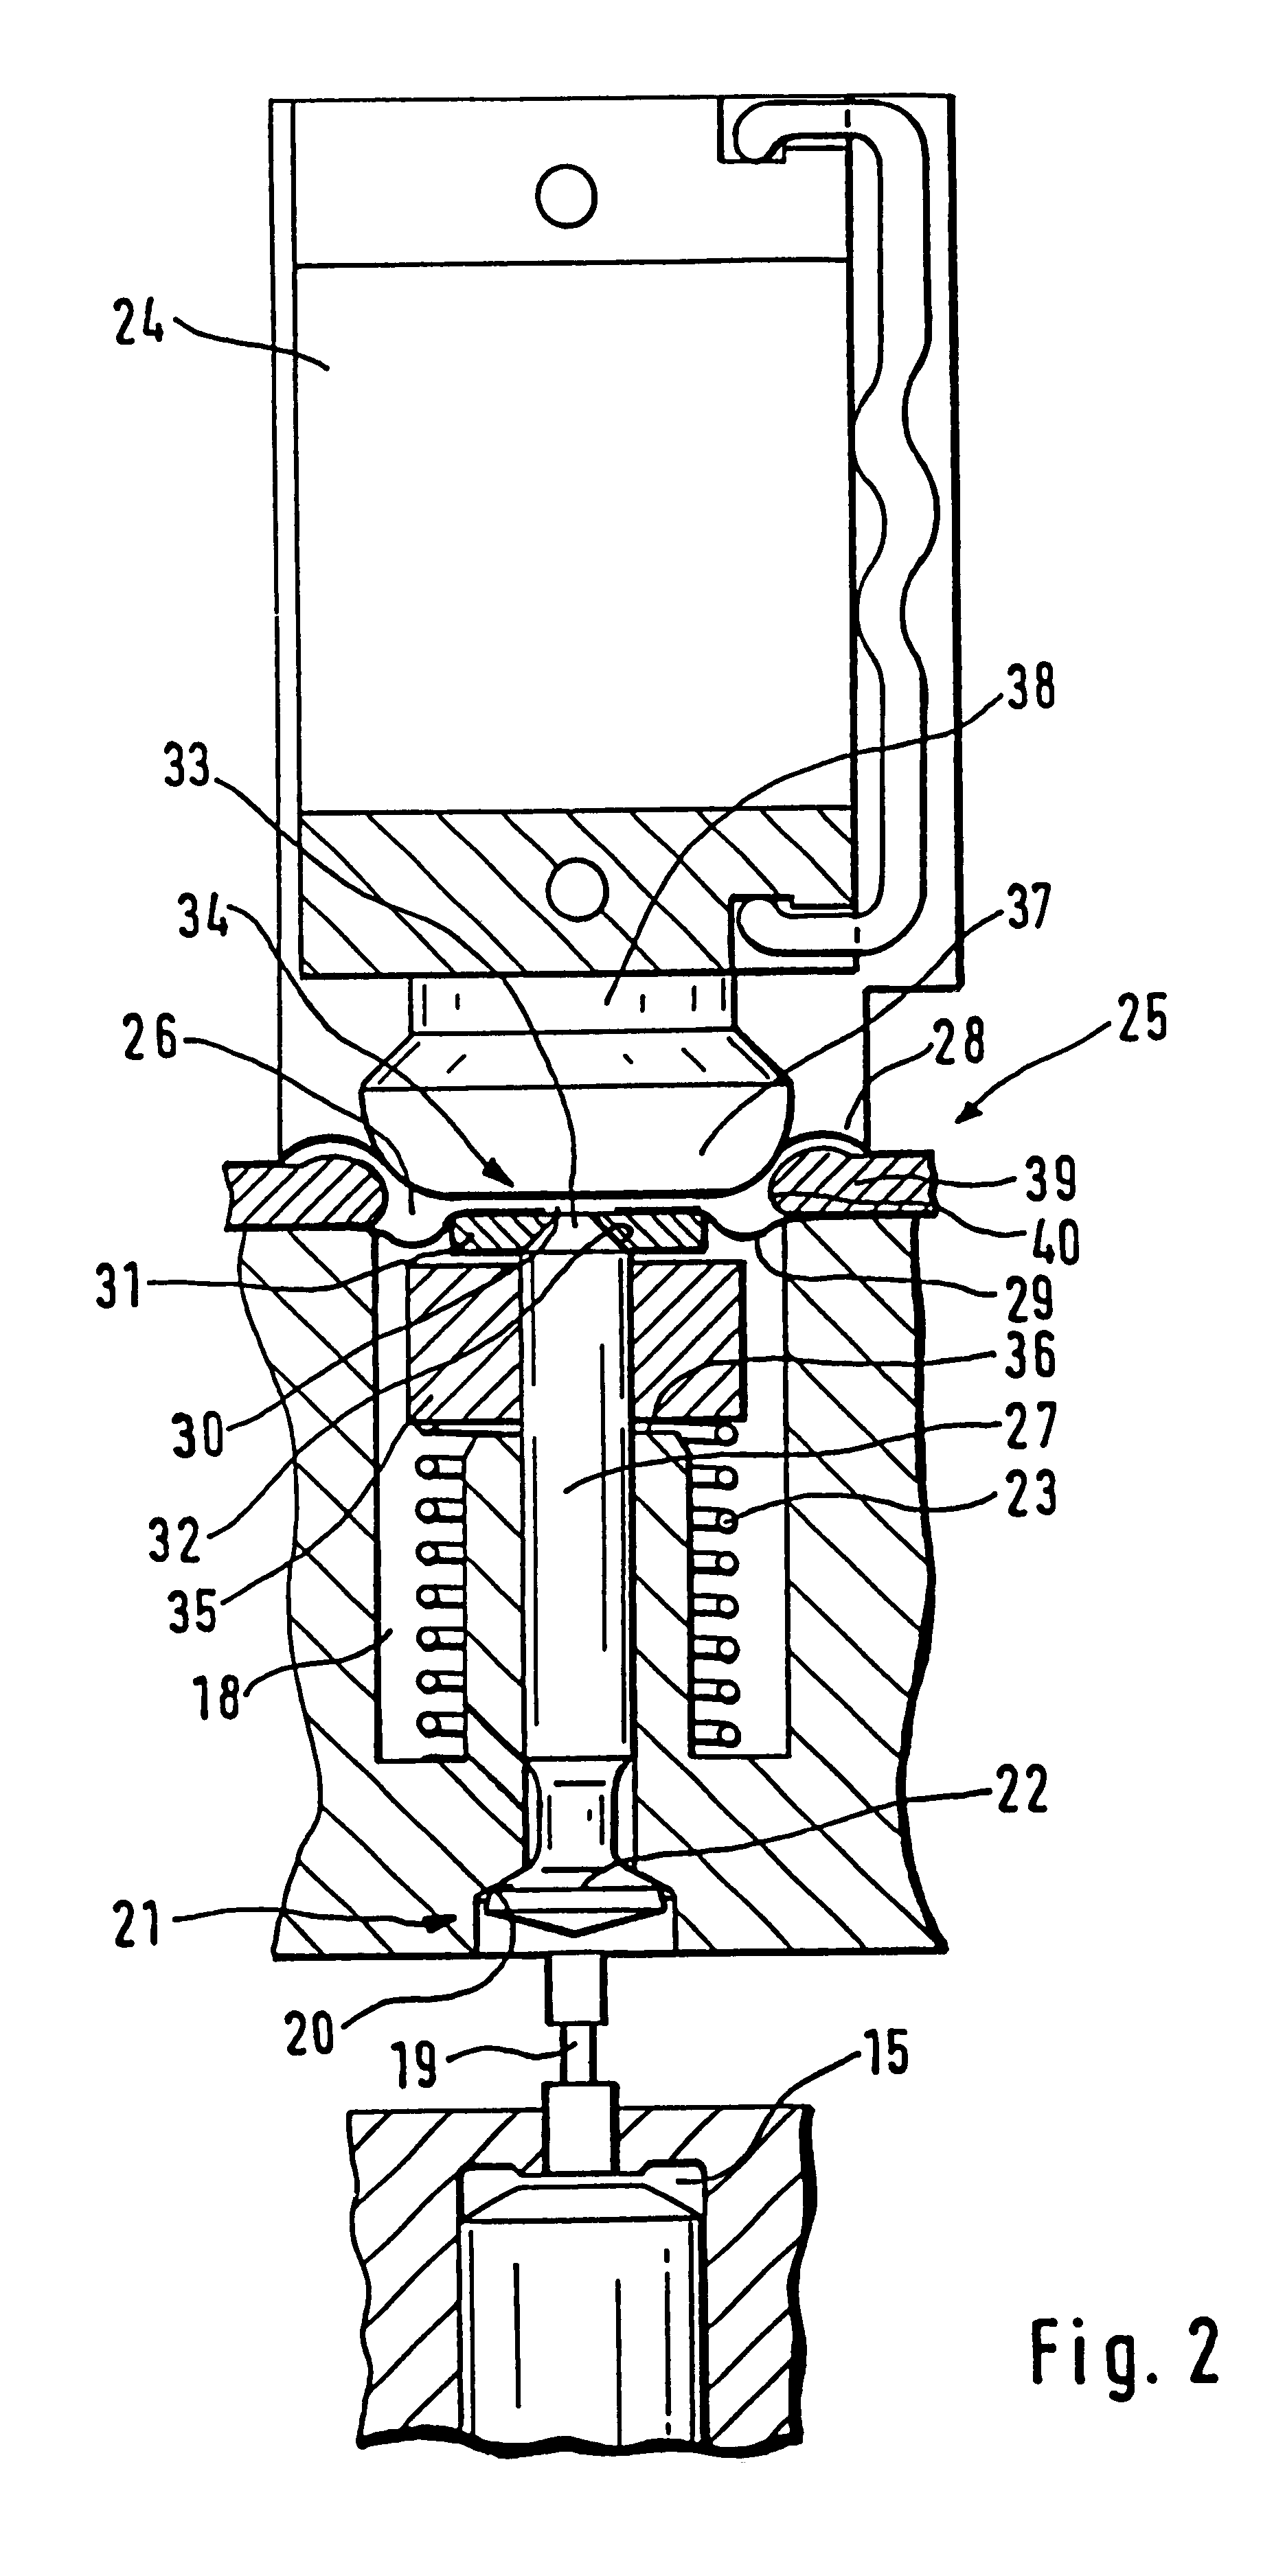 Piezoelectric actuated valve with membrane chamber